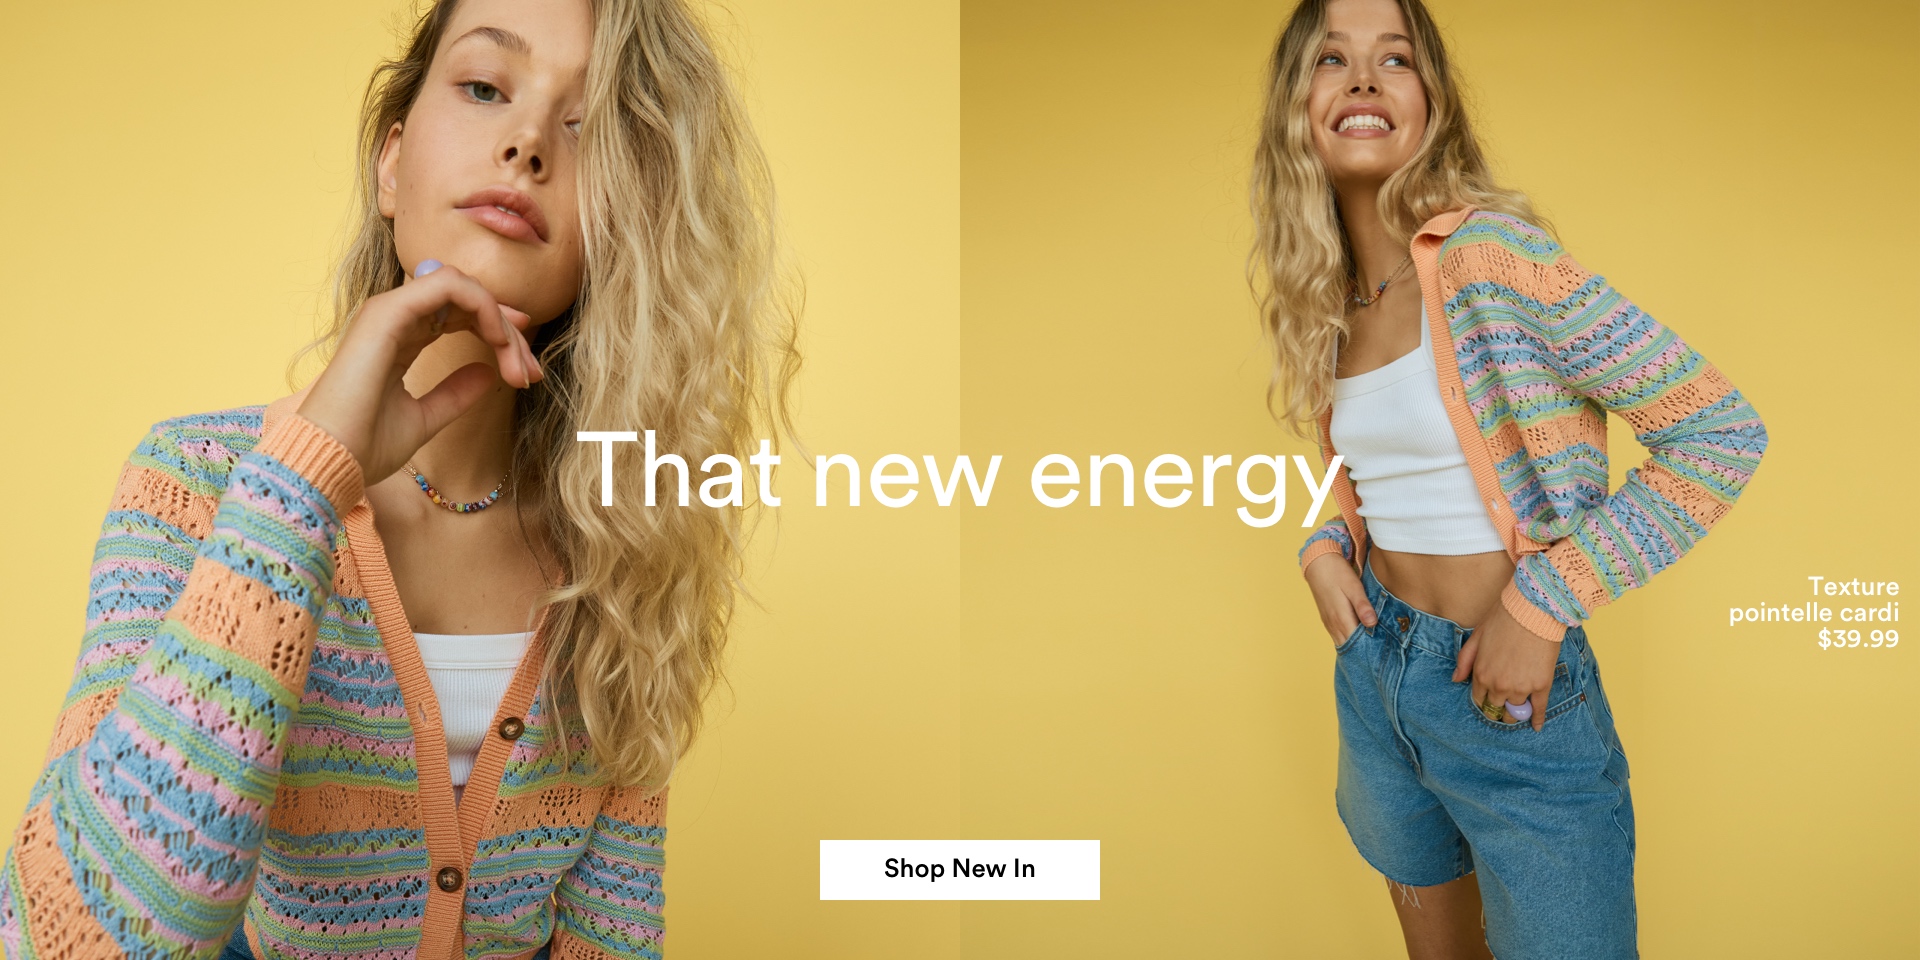 That new energy. Click to Shop Women's New Arrivals.